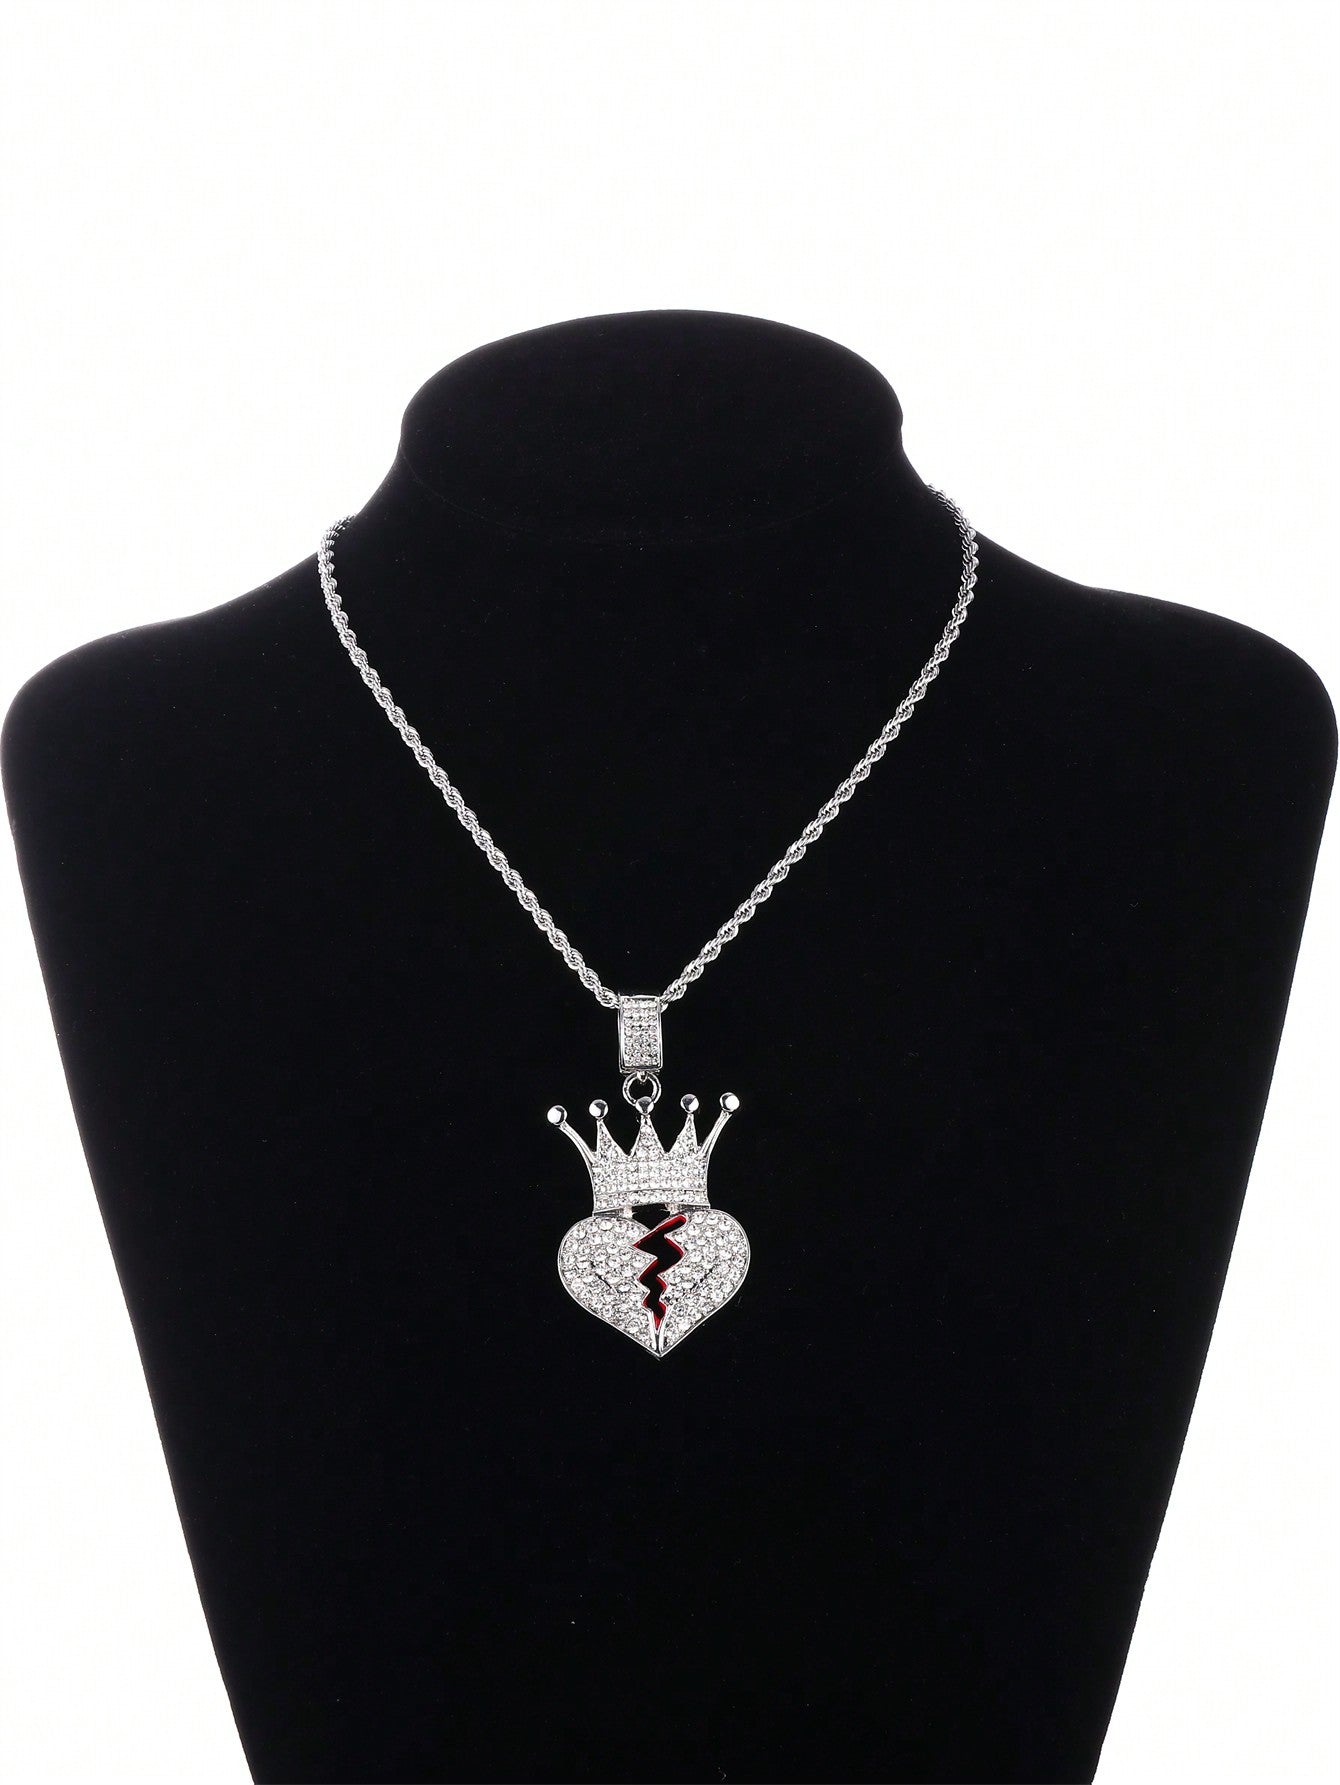 European And American Trendy Accessories, Crown & Broken Heart Pendant With Love Wound Design, Unisex Fashionable Multilayer Chain Necklace Set, Silver/gold Plated, Red Oil Drop Process, Full Drill, 20inch, For Daily Wear Or Festival Gift